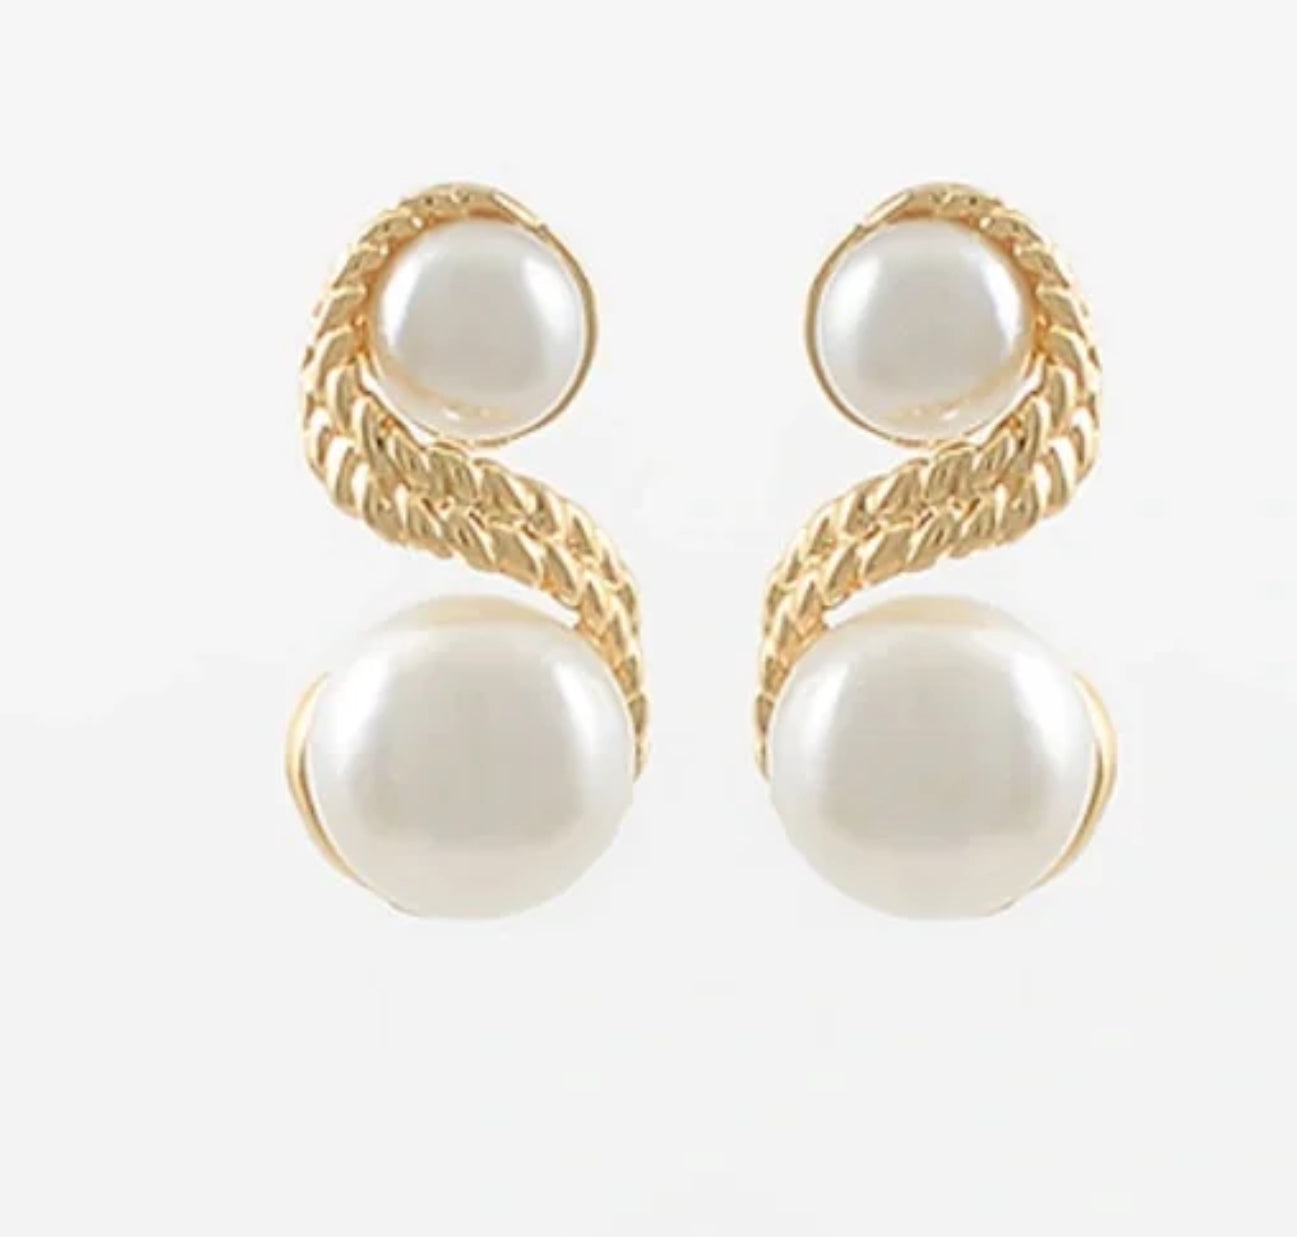 Double Round Pearl & Textured Earrings